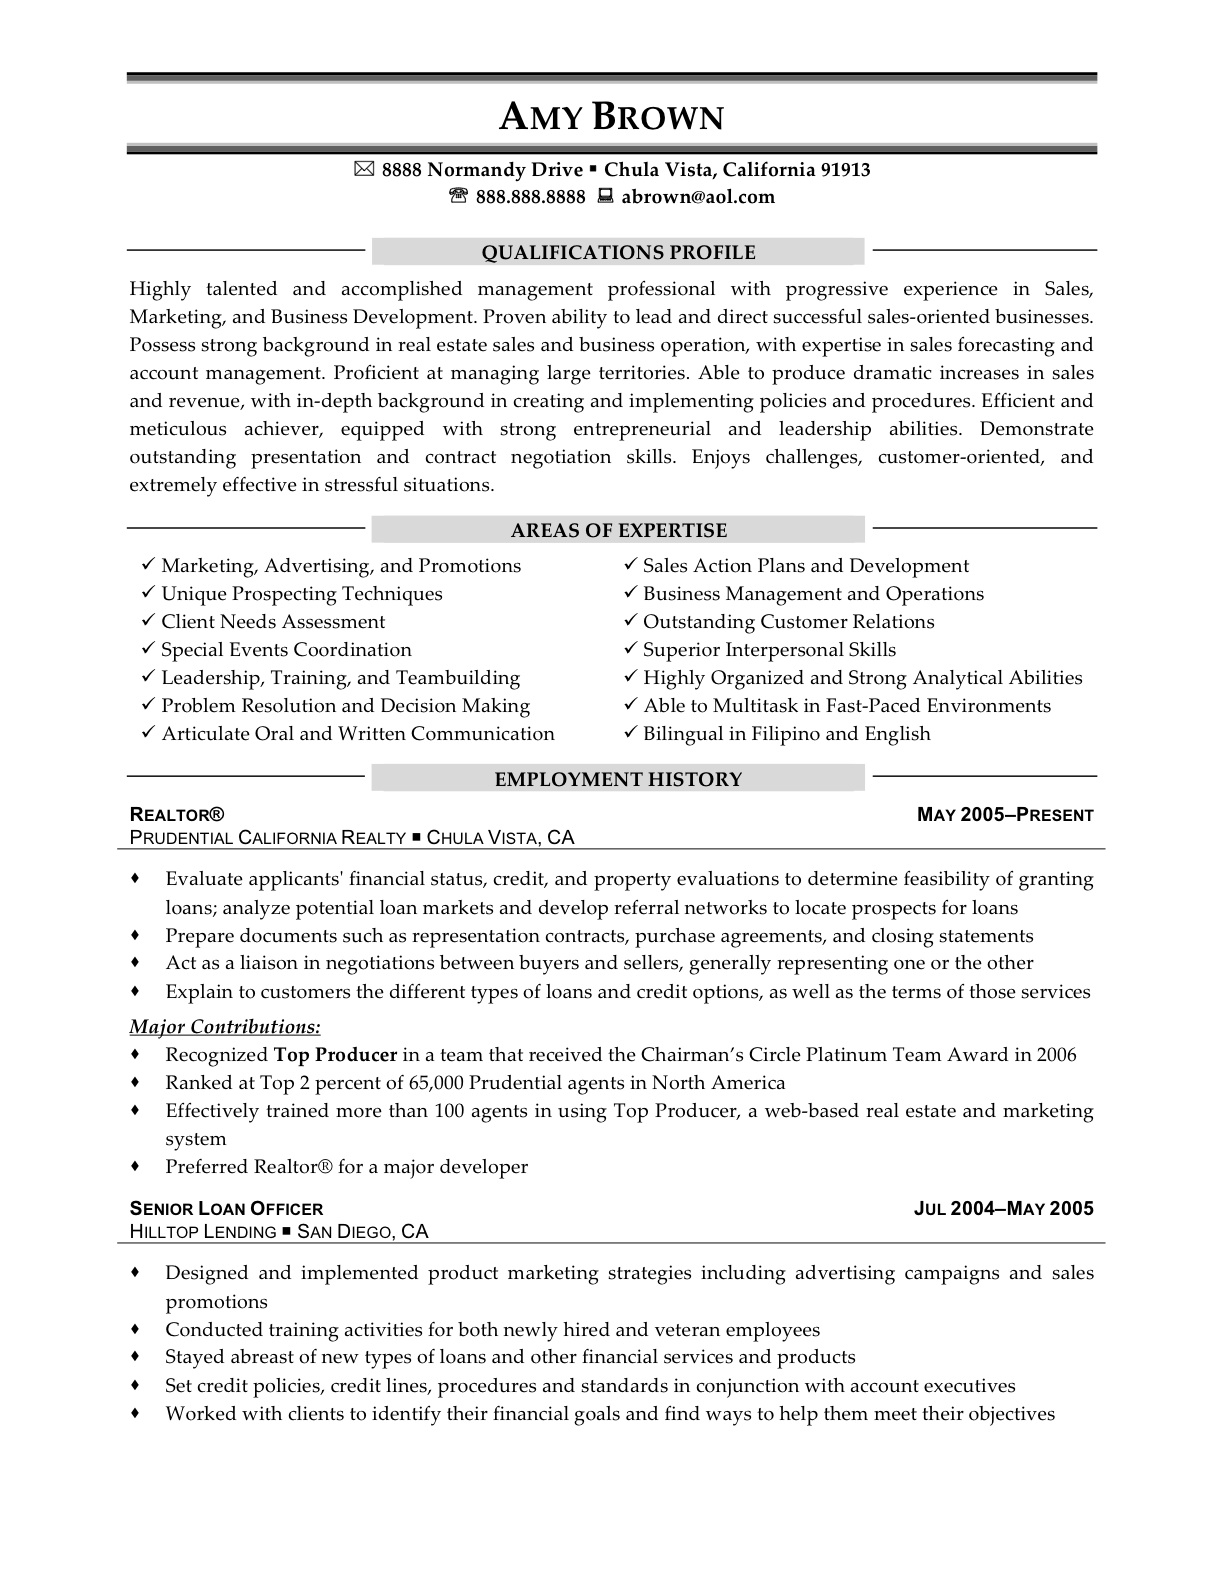 Resume format of arcelormittal